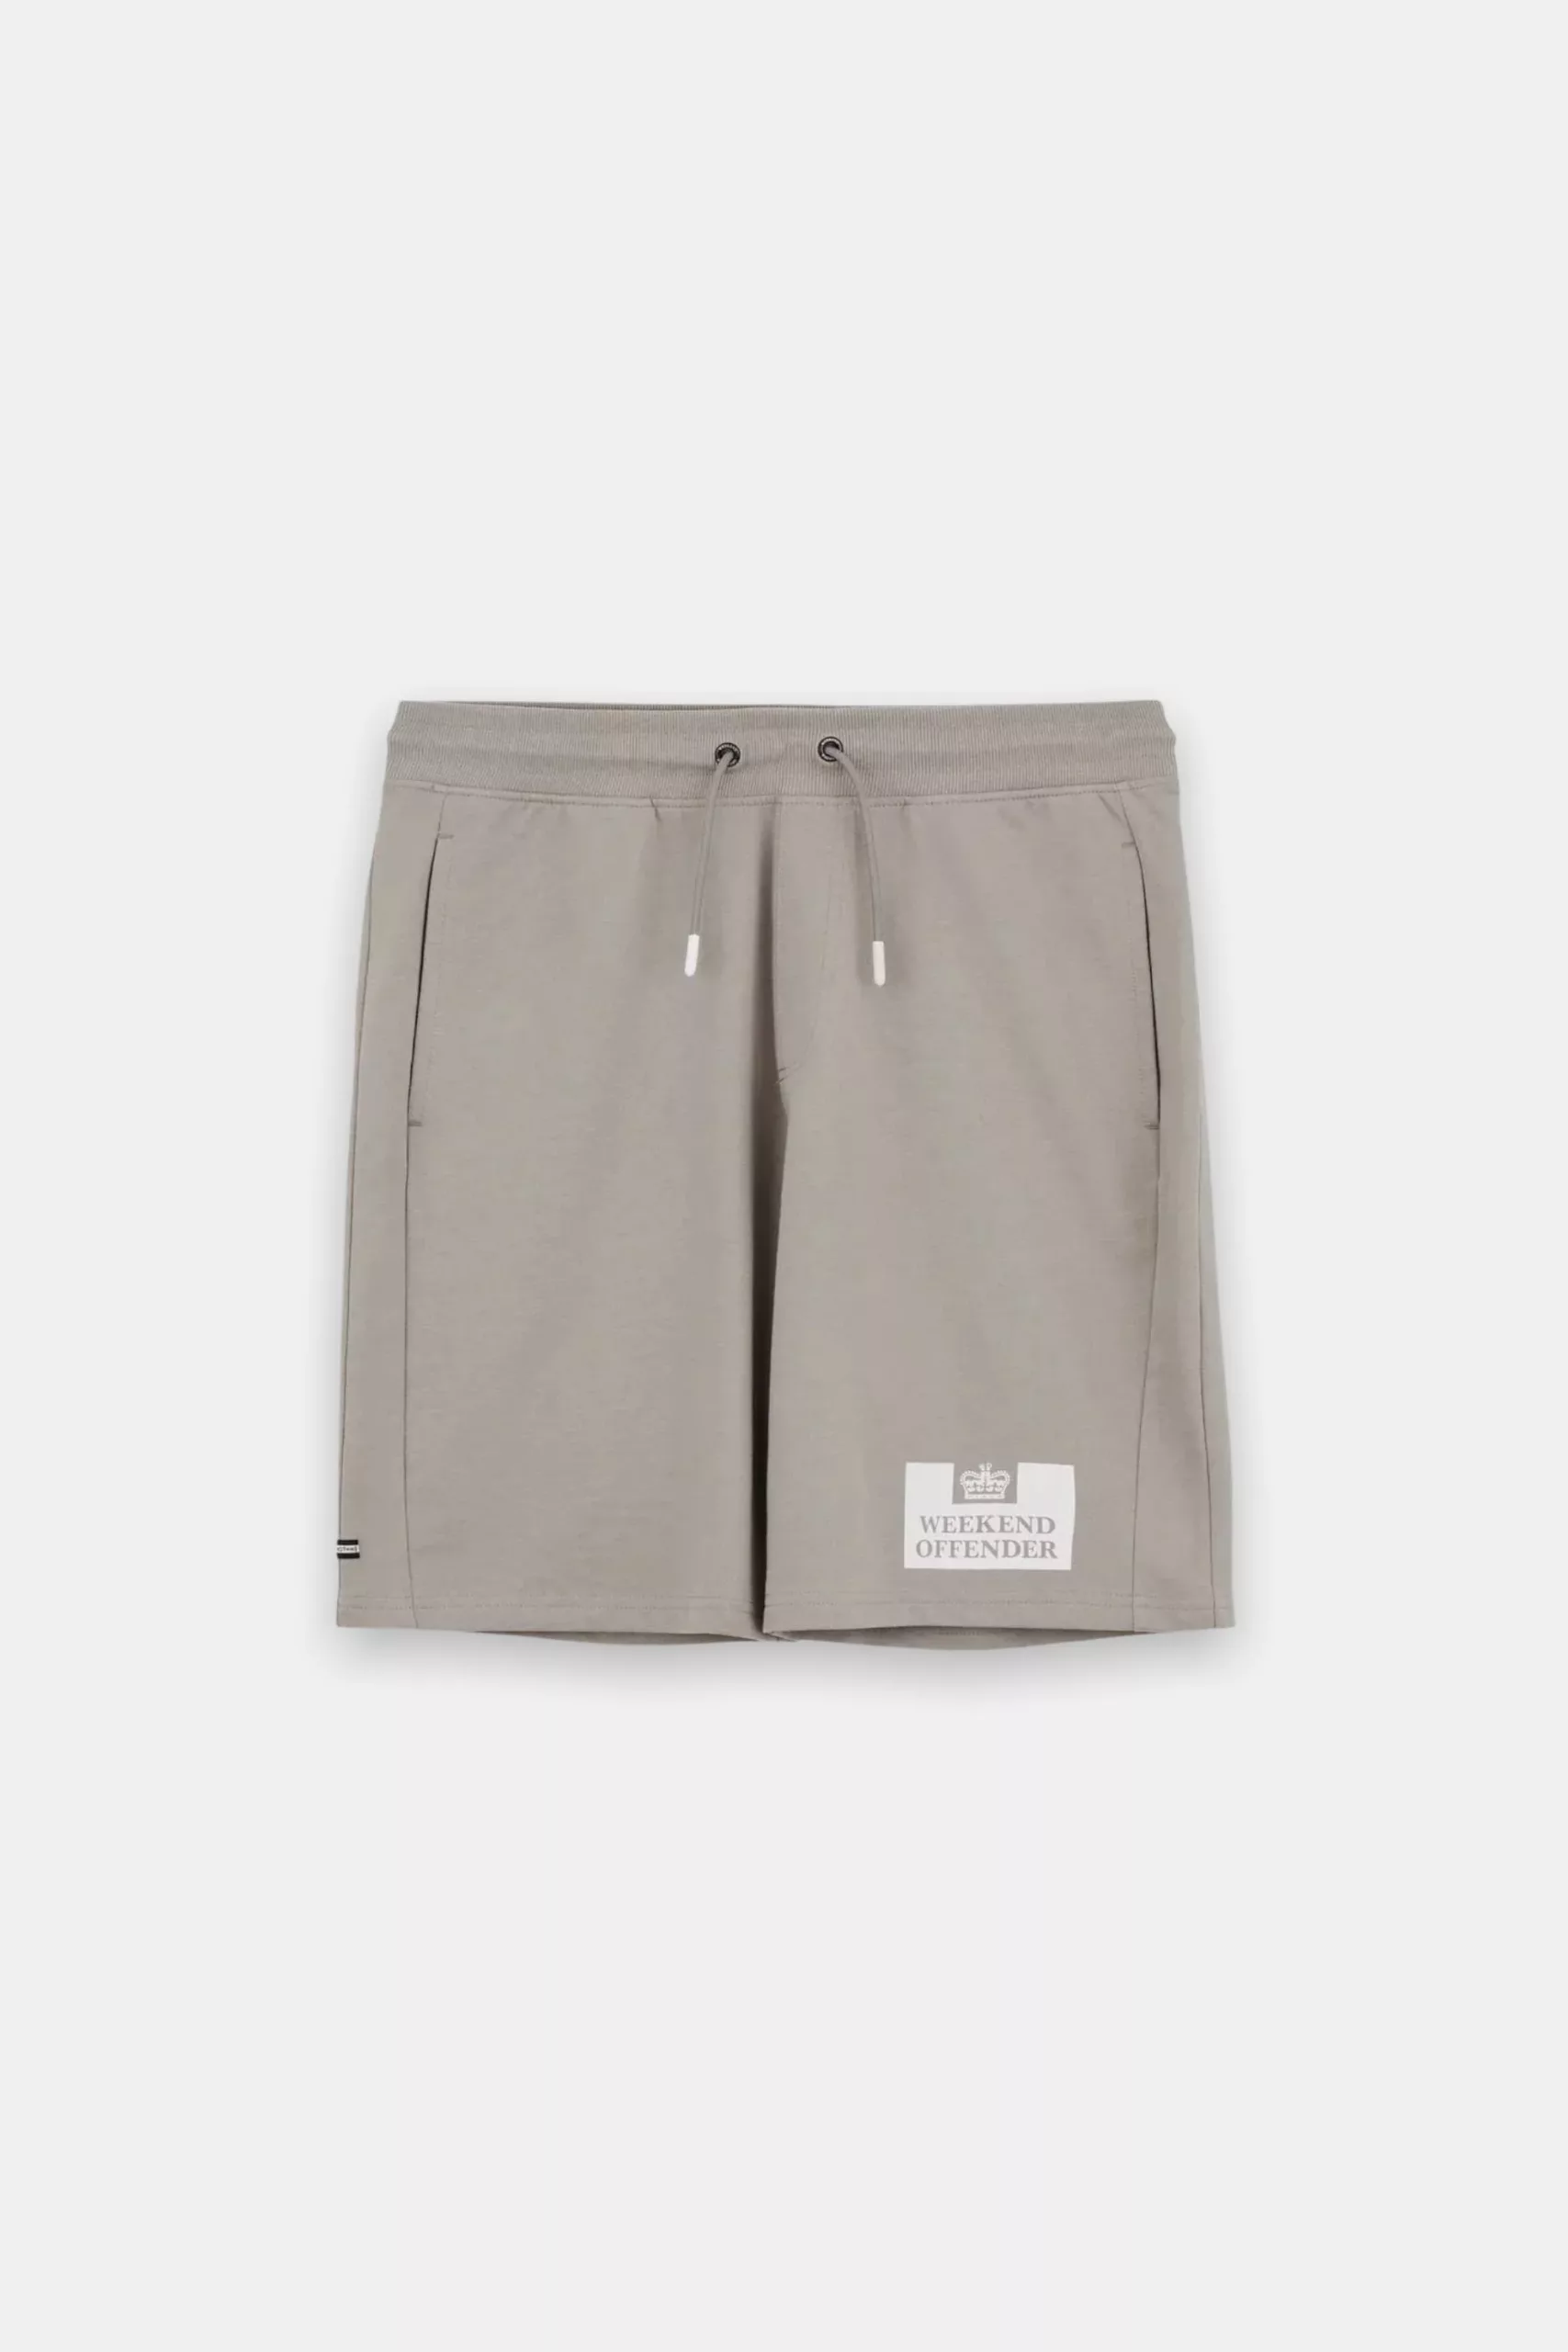 shorty weekend offender action stss2115bul 1